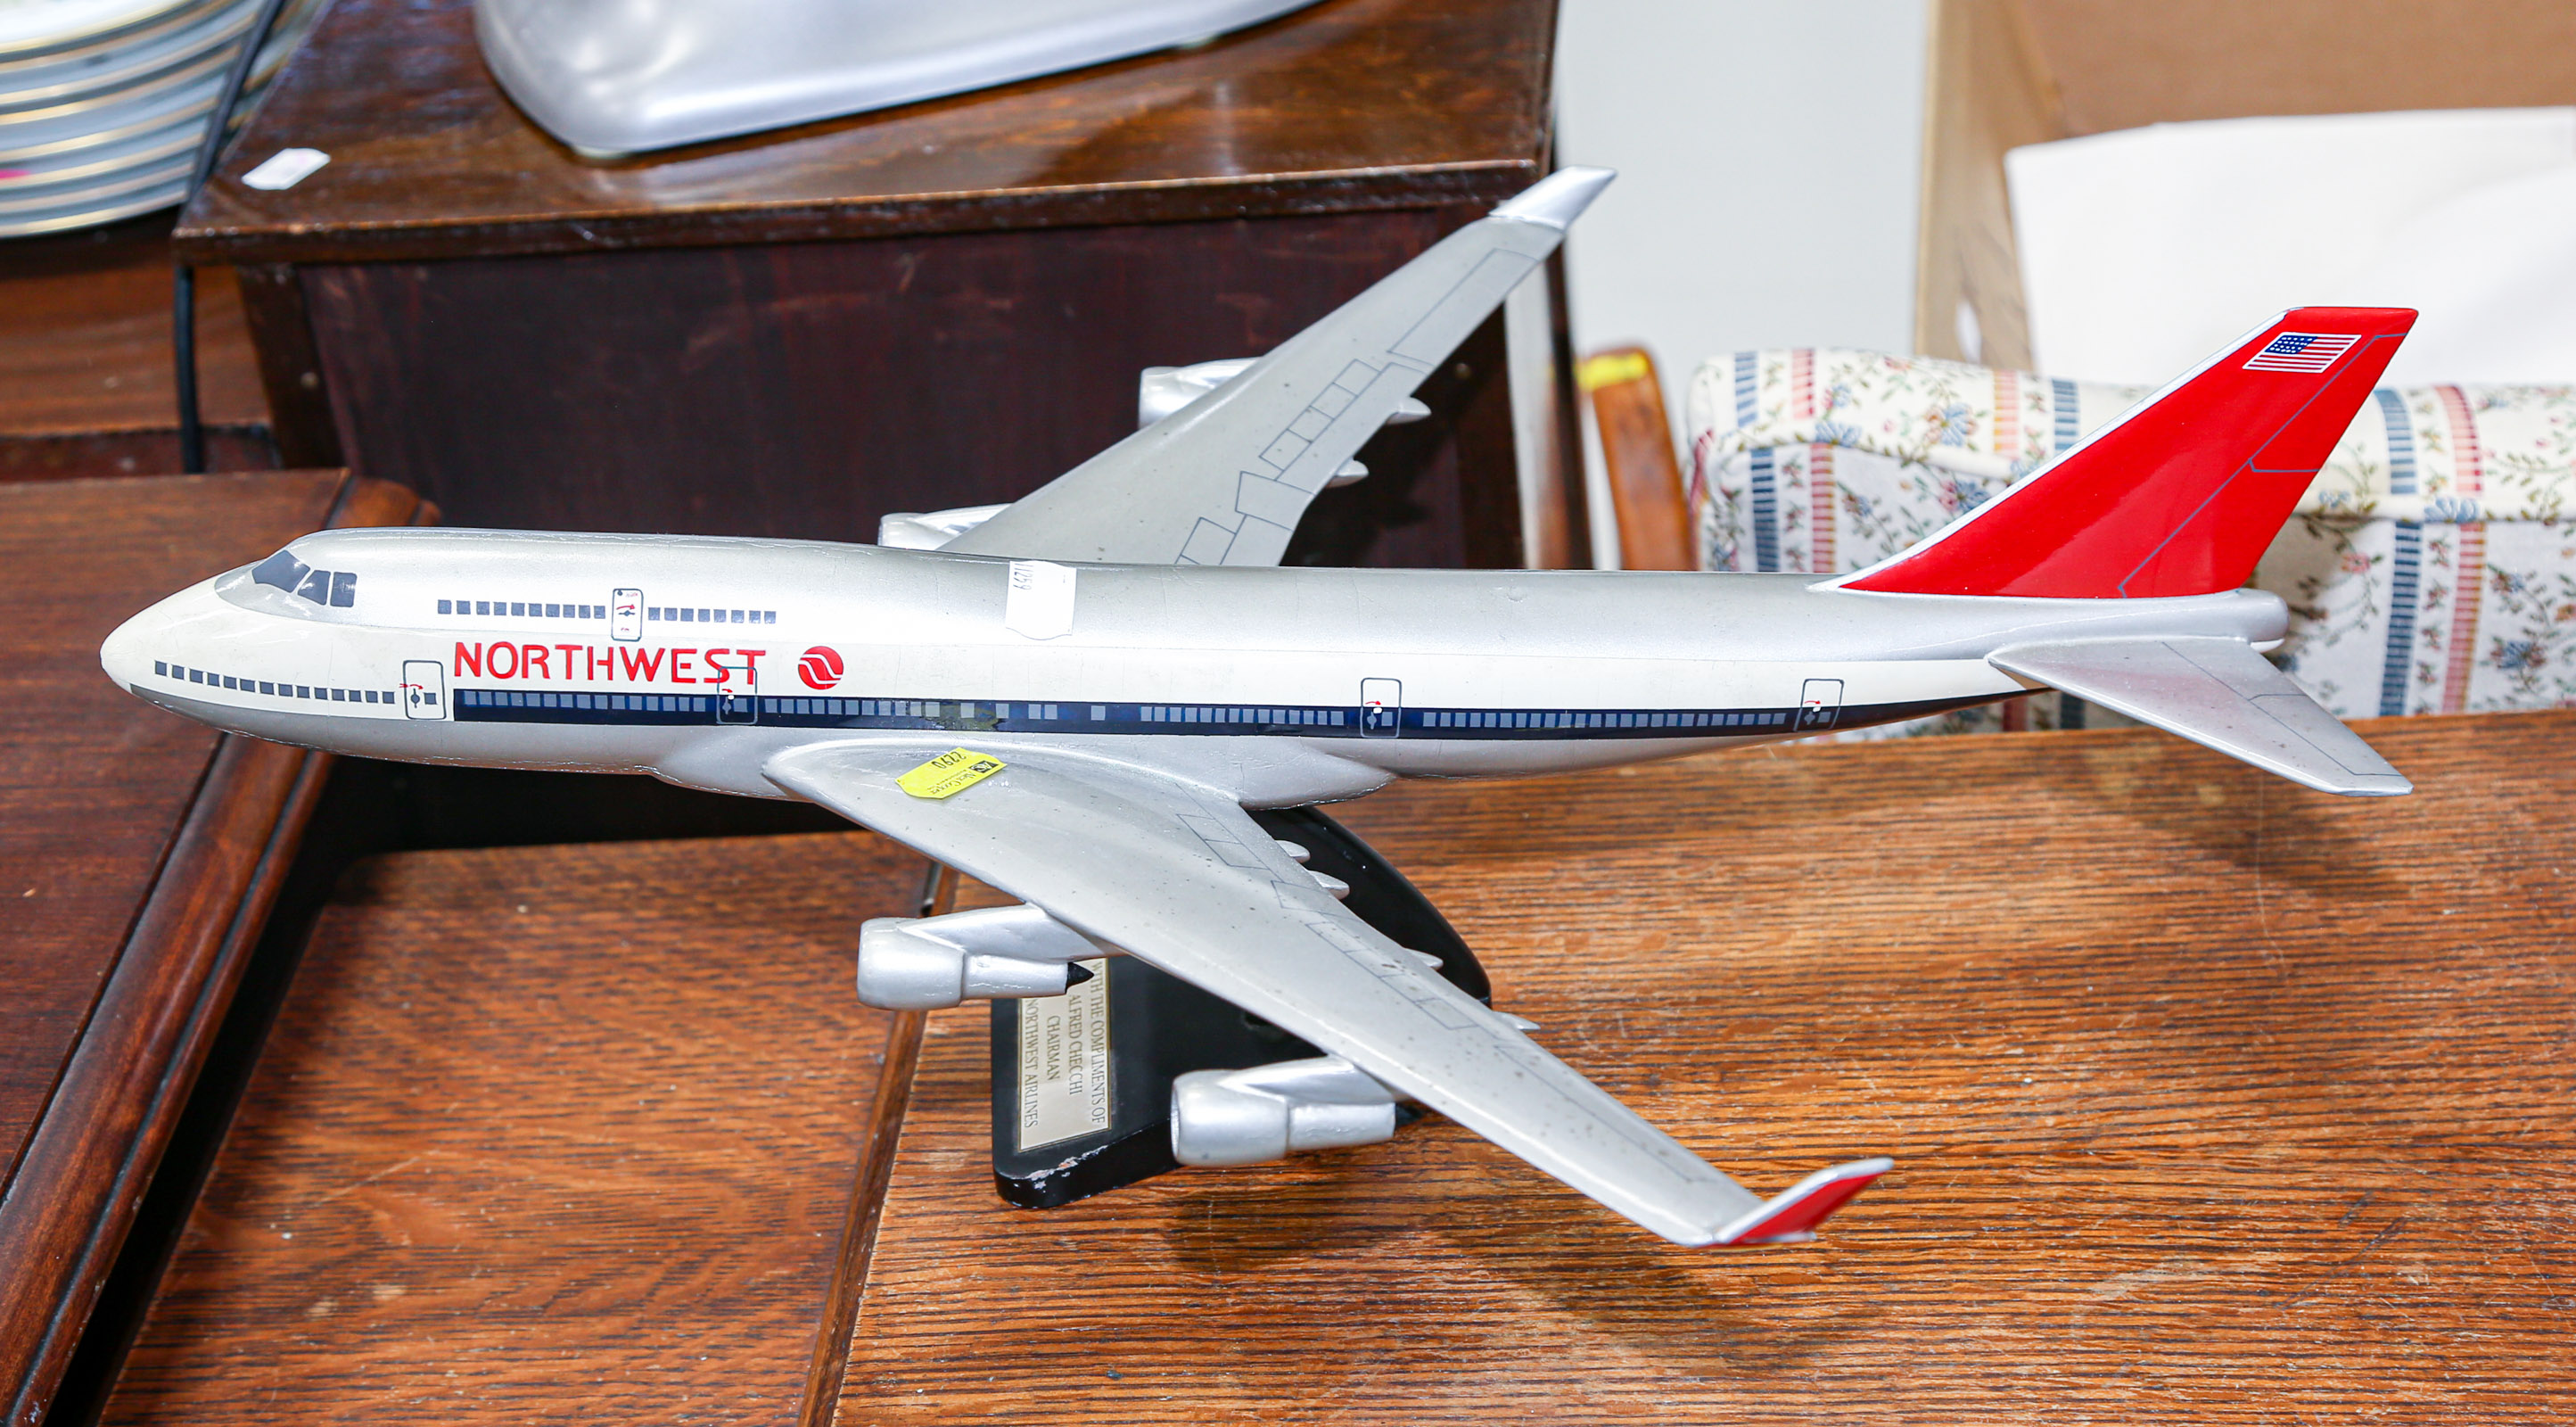 NORTHWEST AIRLINES MODEL OF A PASSENGER